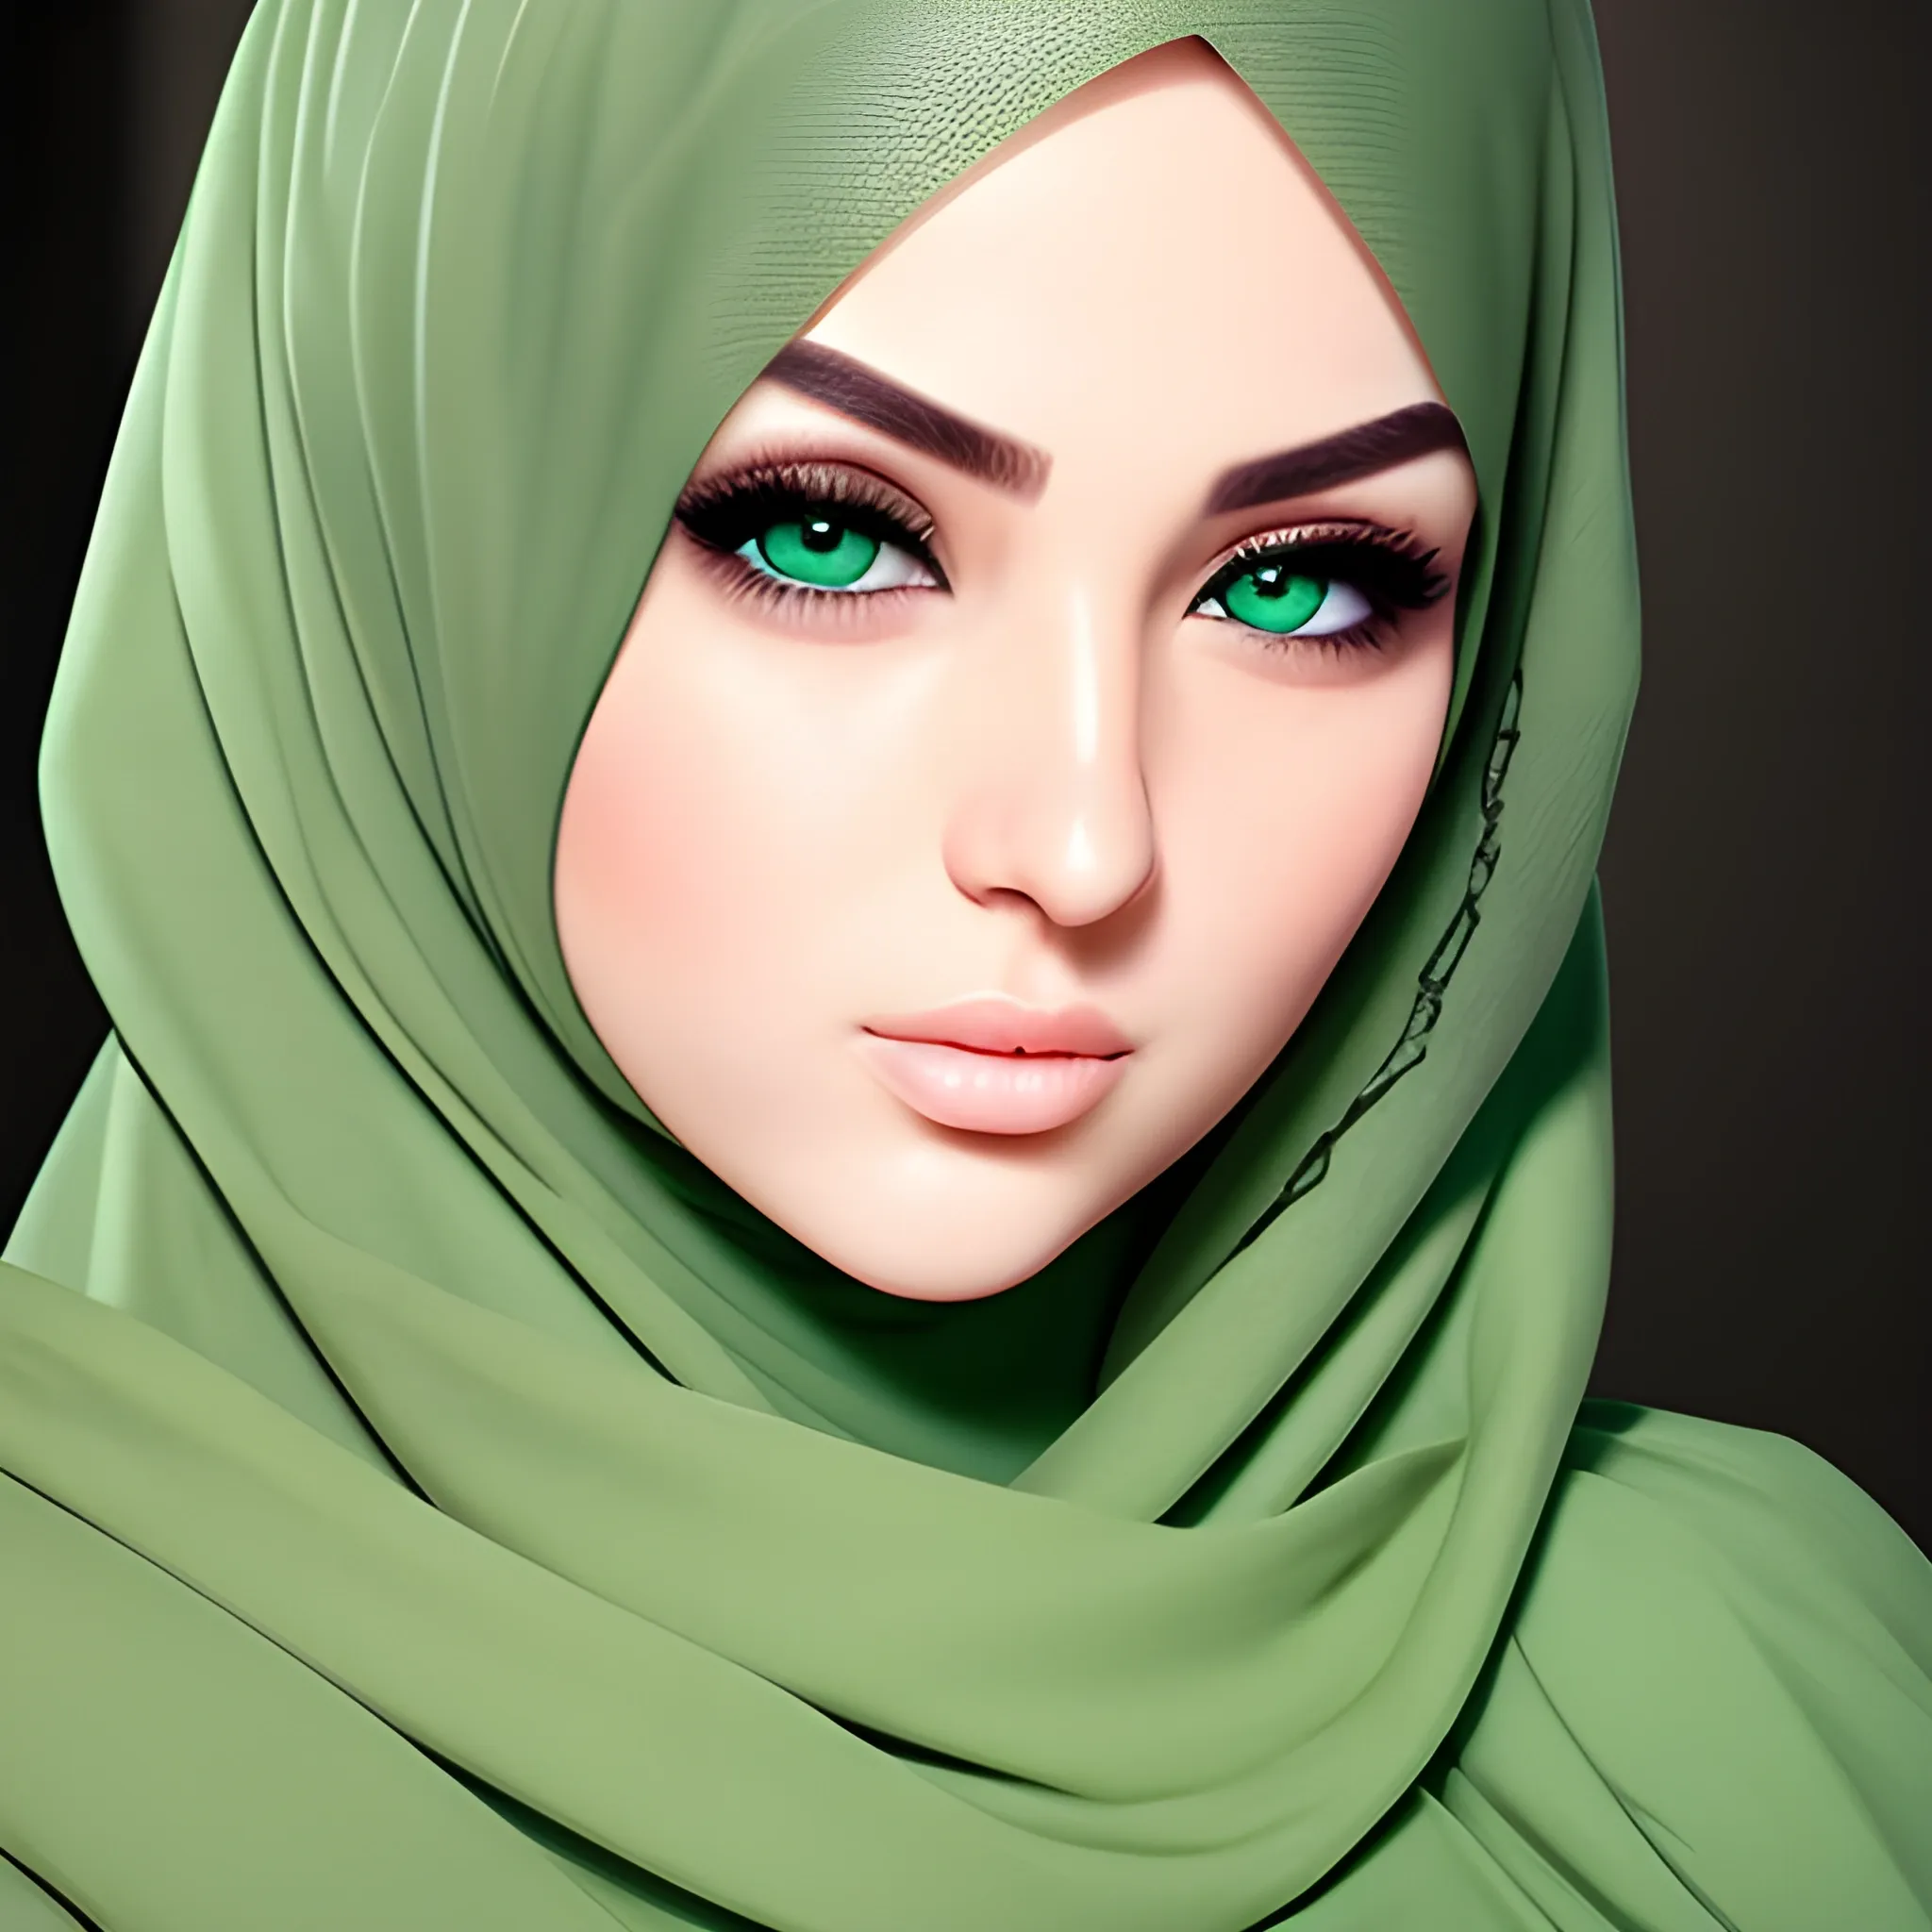 fit hot hijab babe beautiful green eyes side pose masterpiece ar